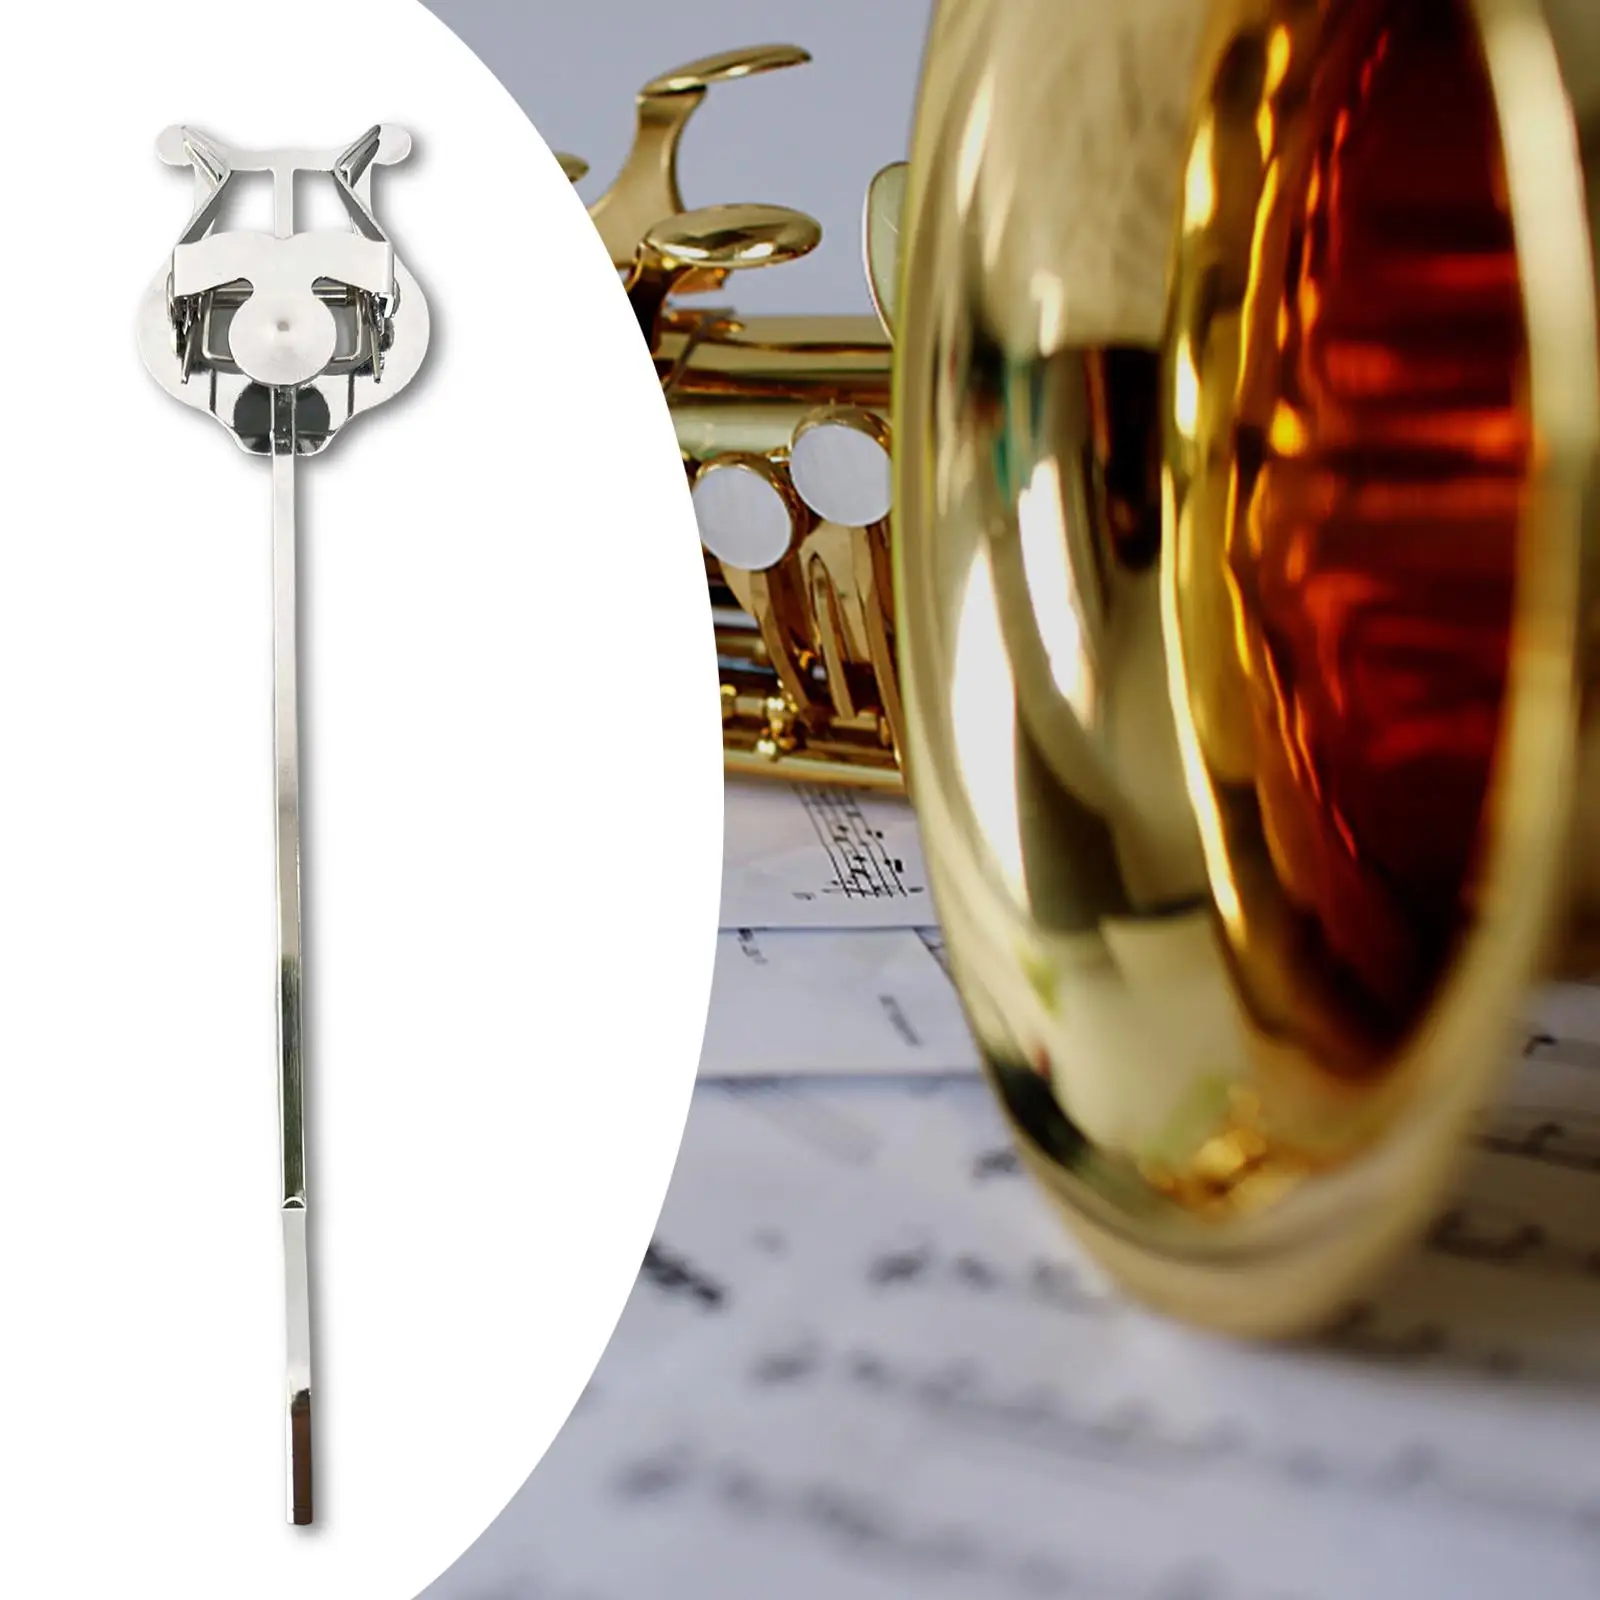 Portable Saxophone Sheet Music Clip Instrument Lyre Clamps Lightweight Professional for Alto